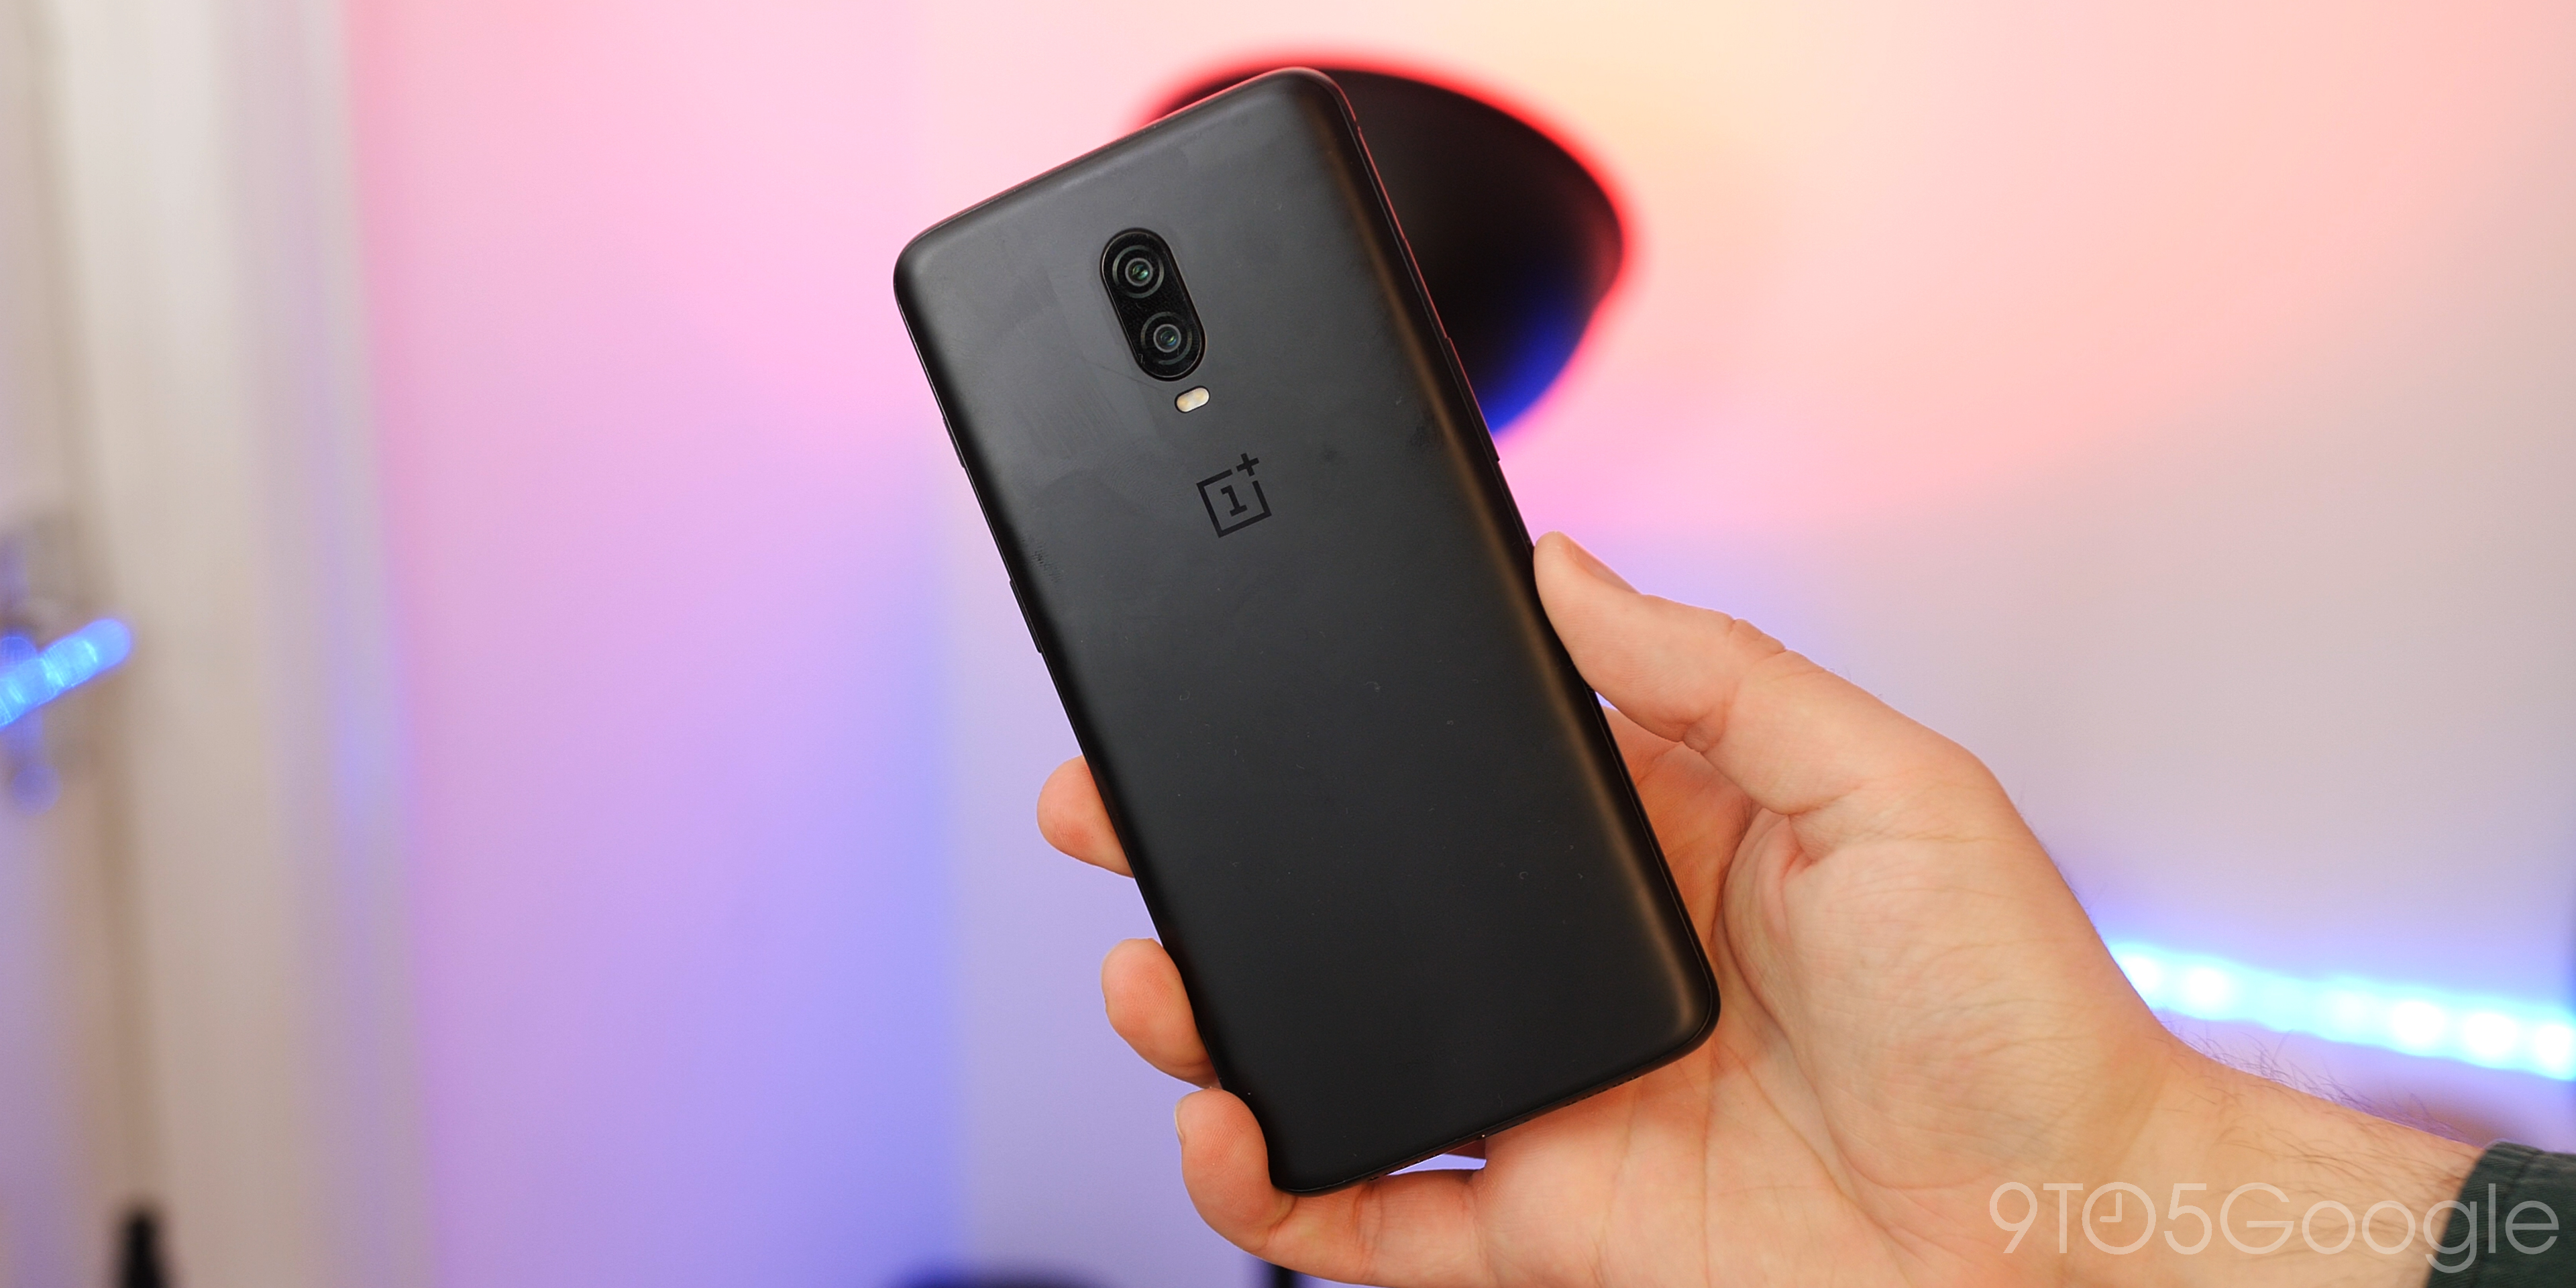 where can i buy a oneplus 6t